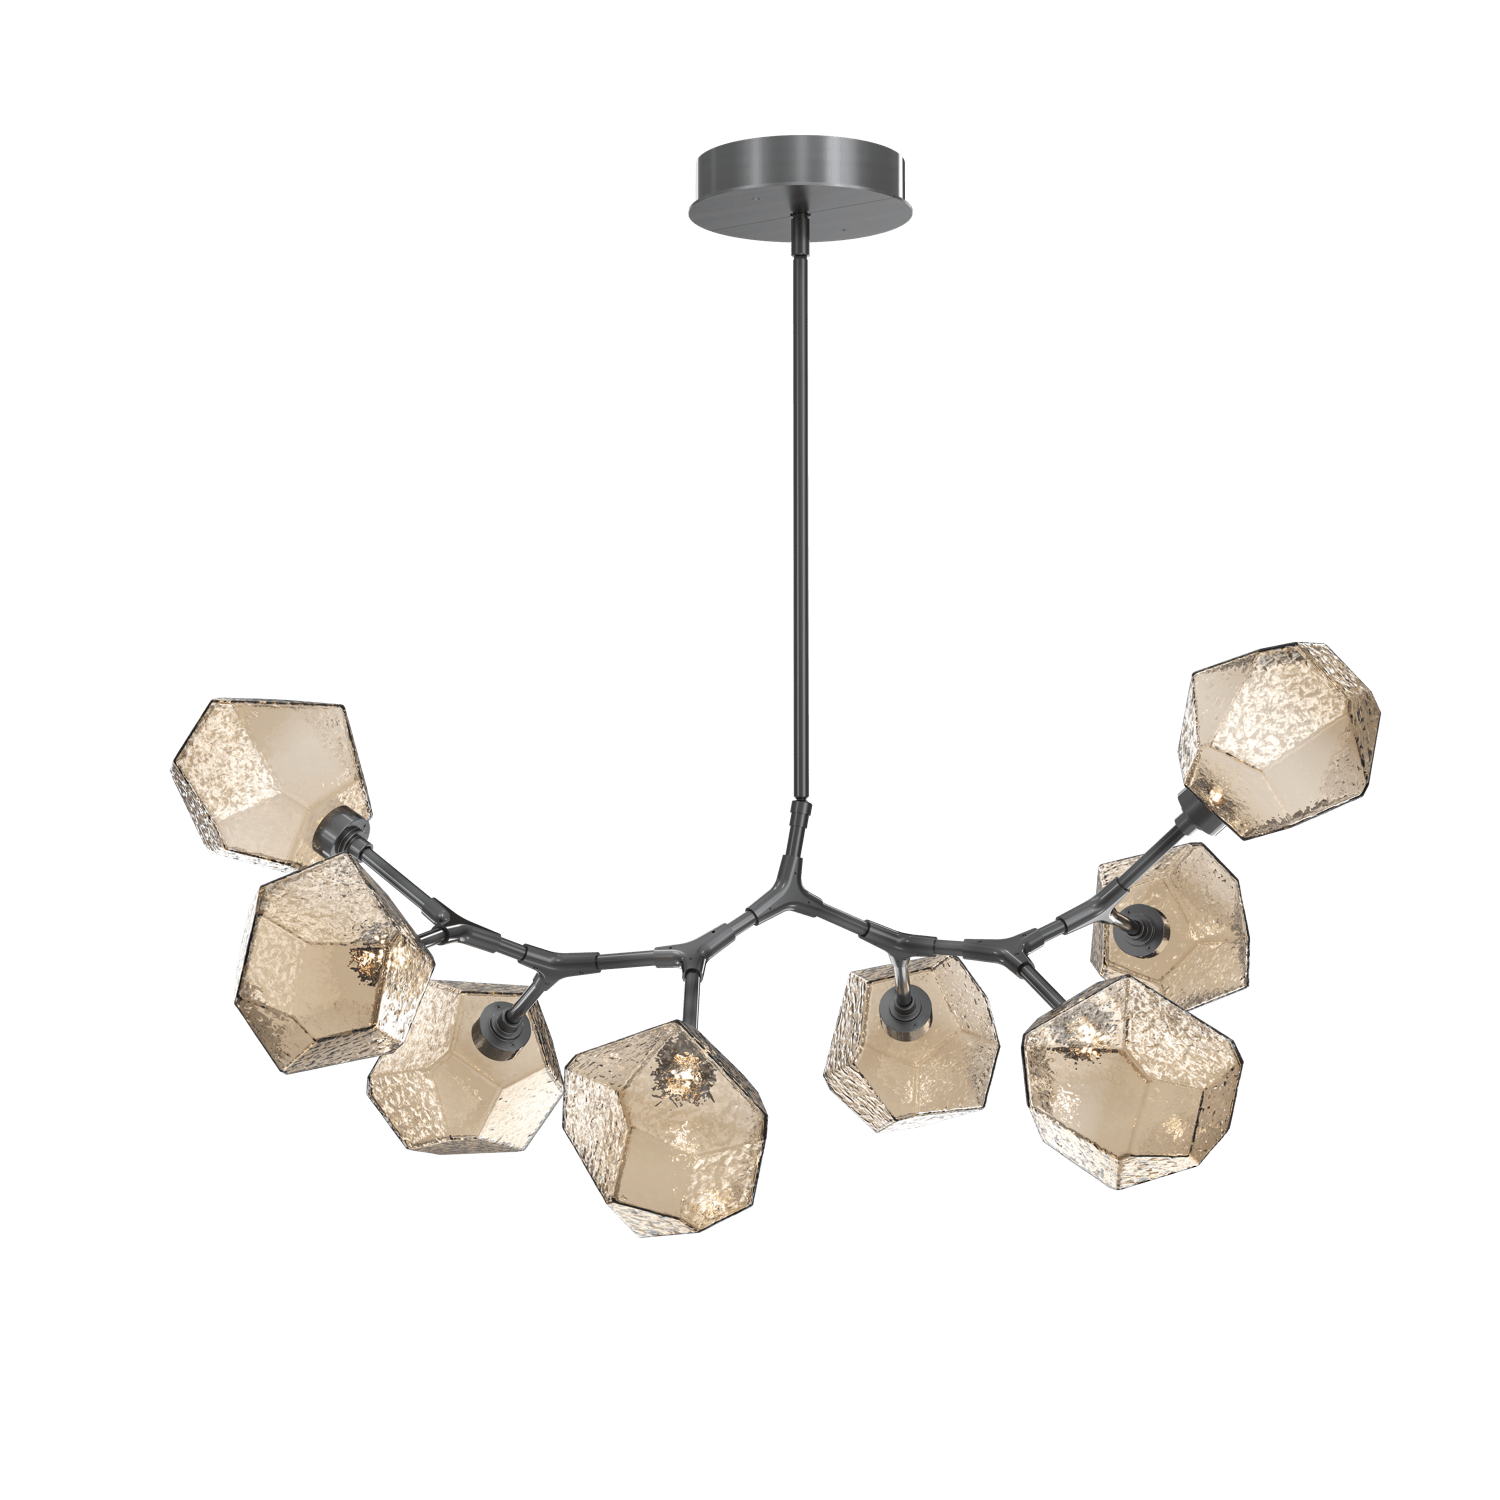 PLB0039-BB-GM-B-Hammerton-Studio-Gem-8-light-modern-branch-chandelier-with-gunmetal-finish-and-bronze-blown-glass-shades-and-LED-lamping